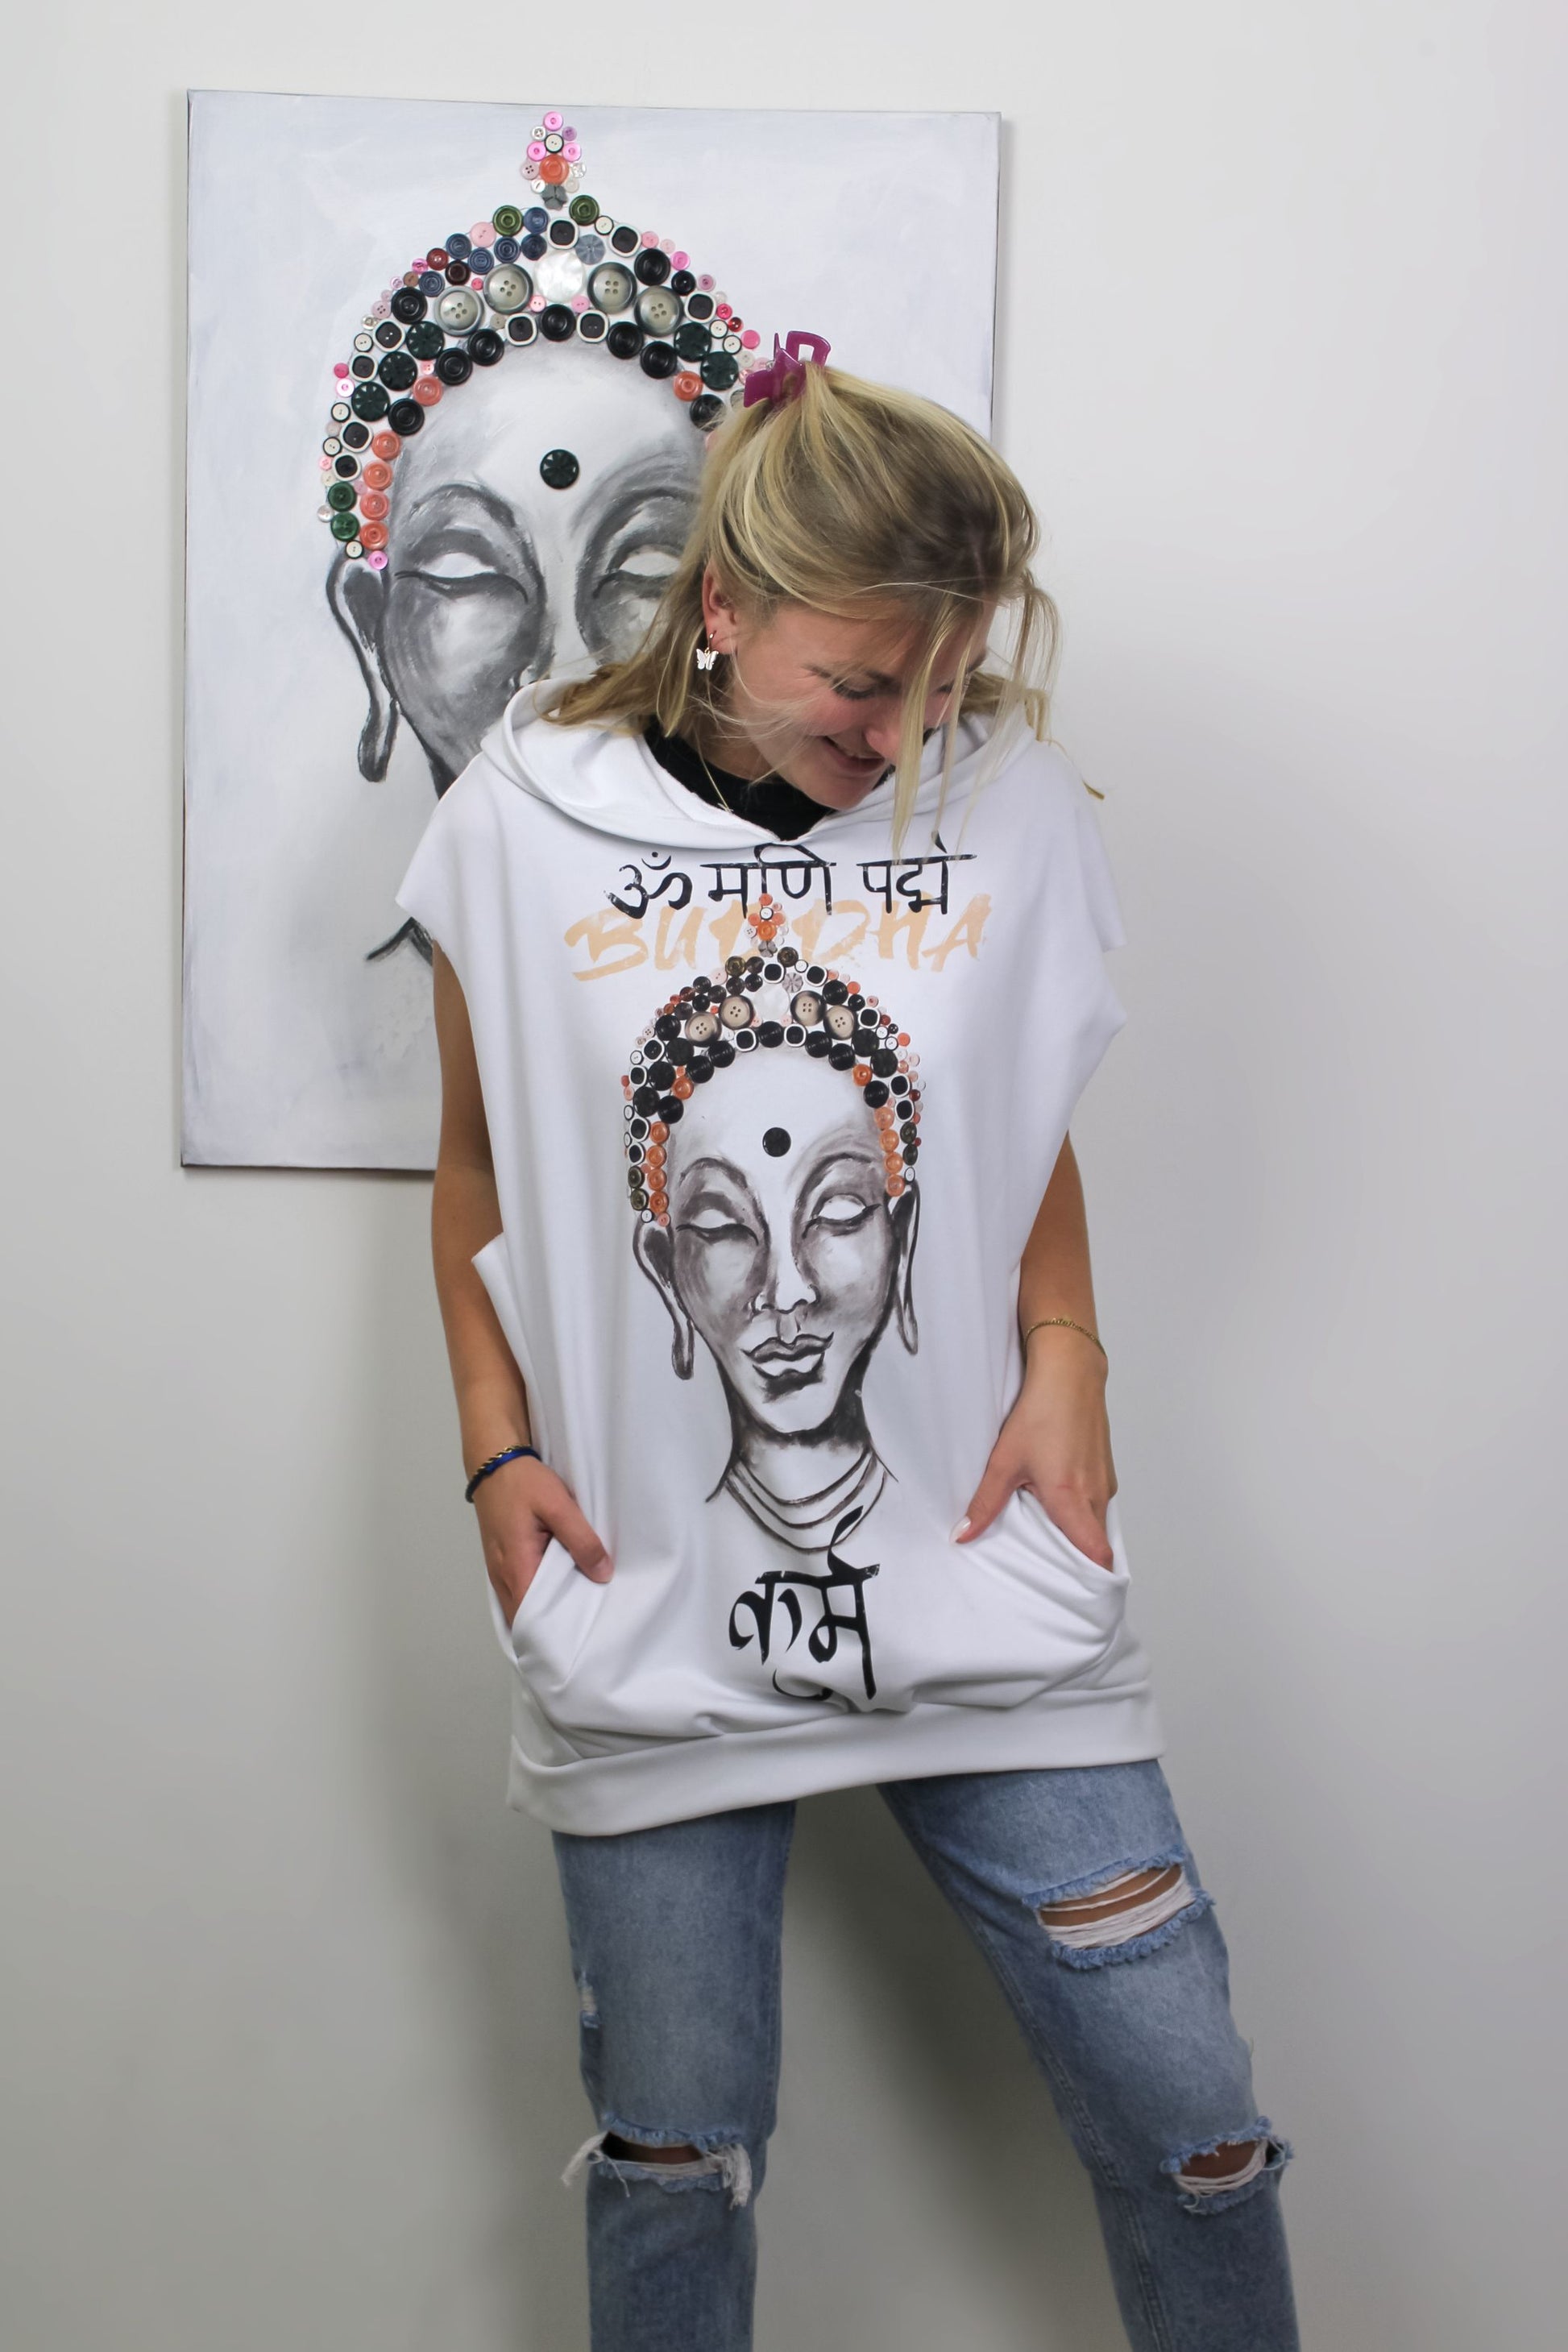 Buddha Hoodie displayed against the original artwork by Kim Vermeulen, creating a captivating juxtaposition of fashion and art.